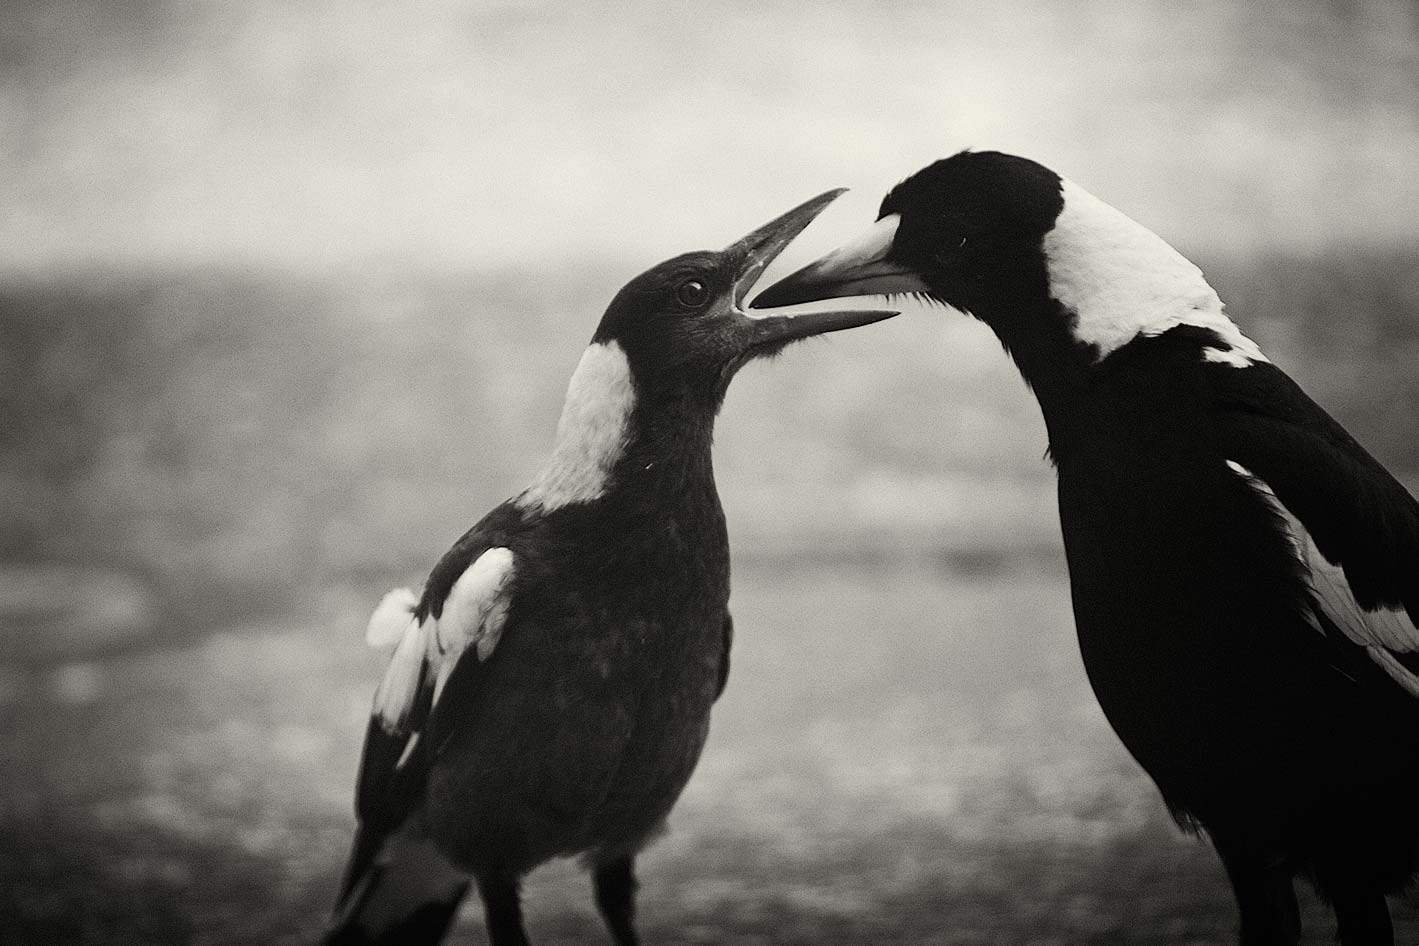 two magpies, one with beak inside other's